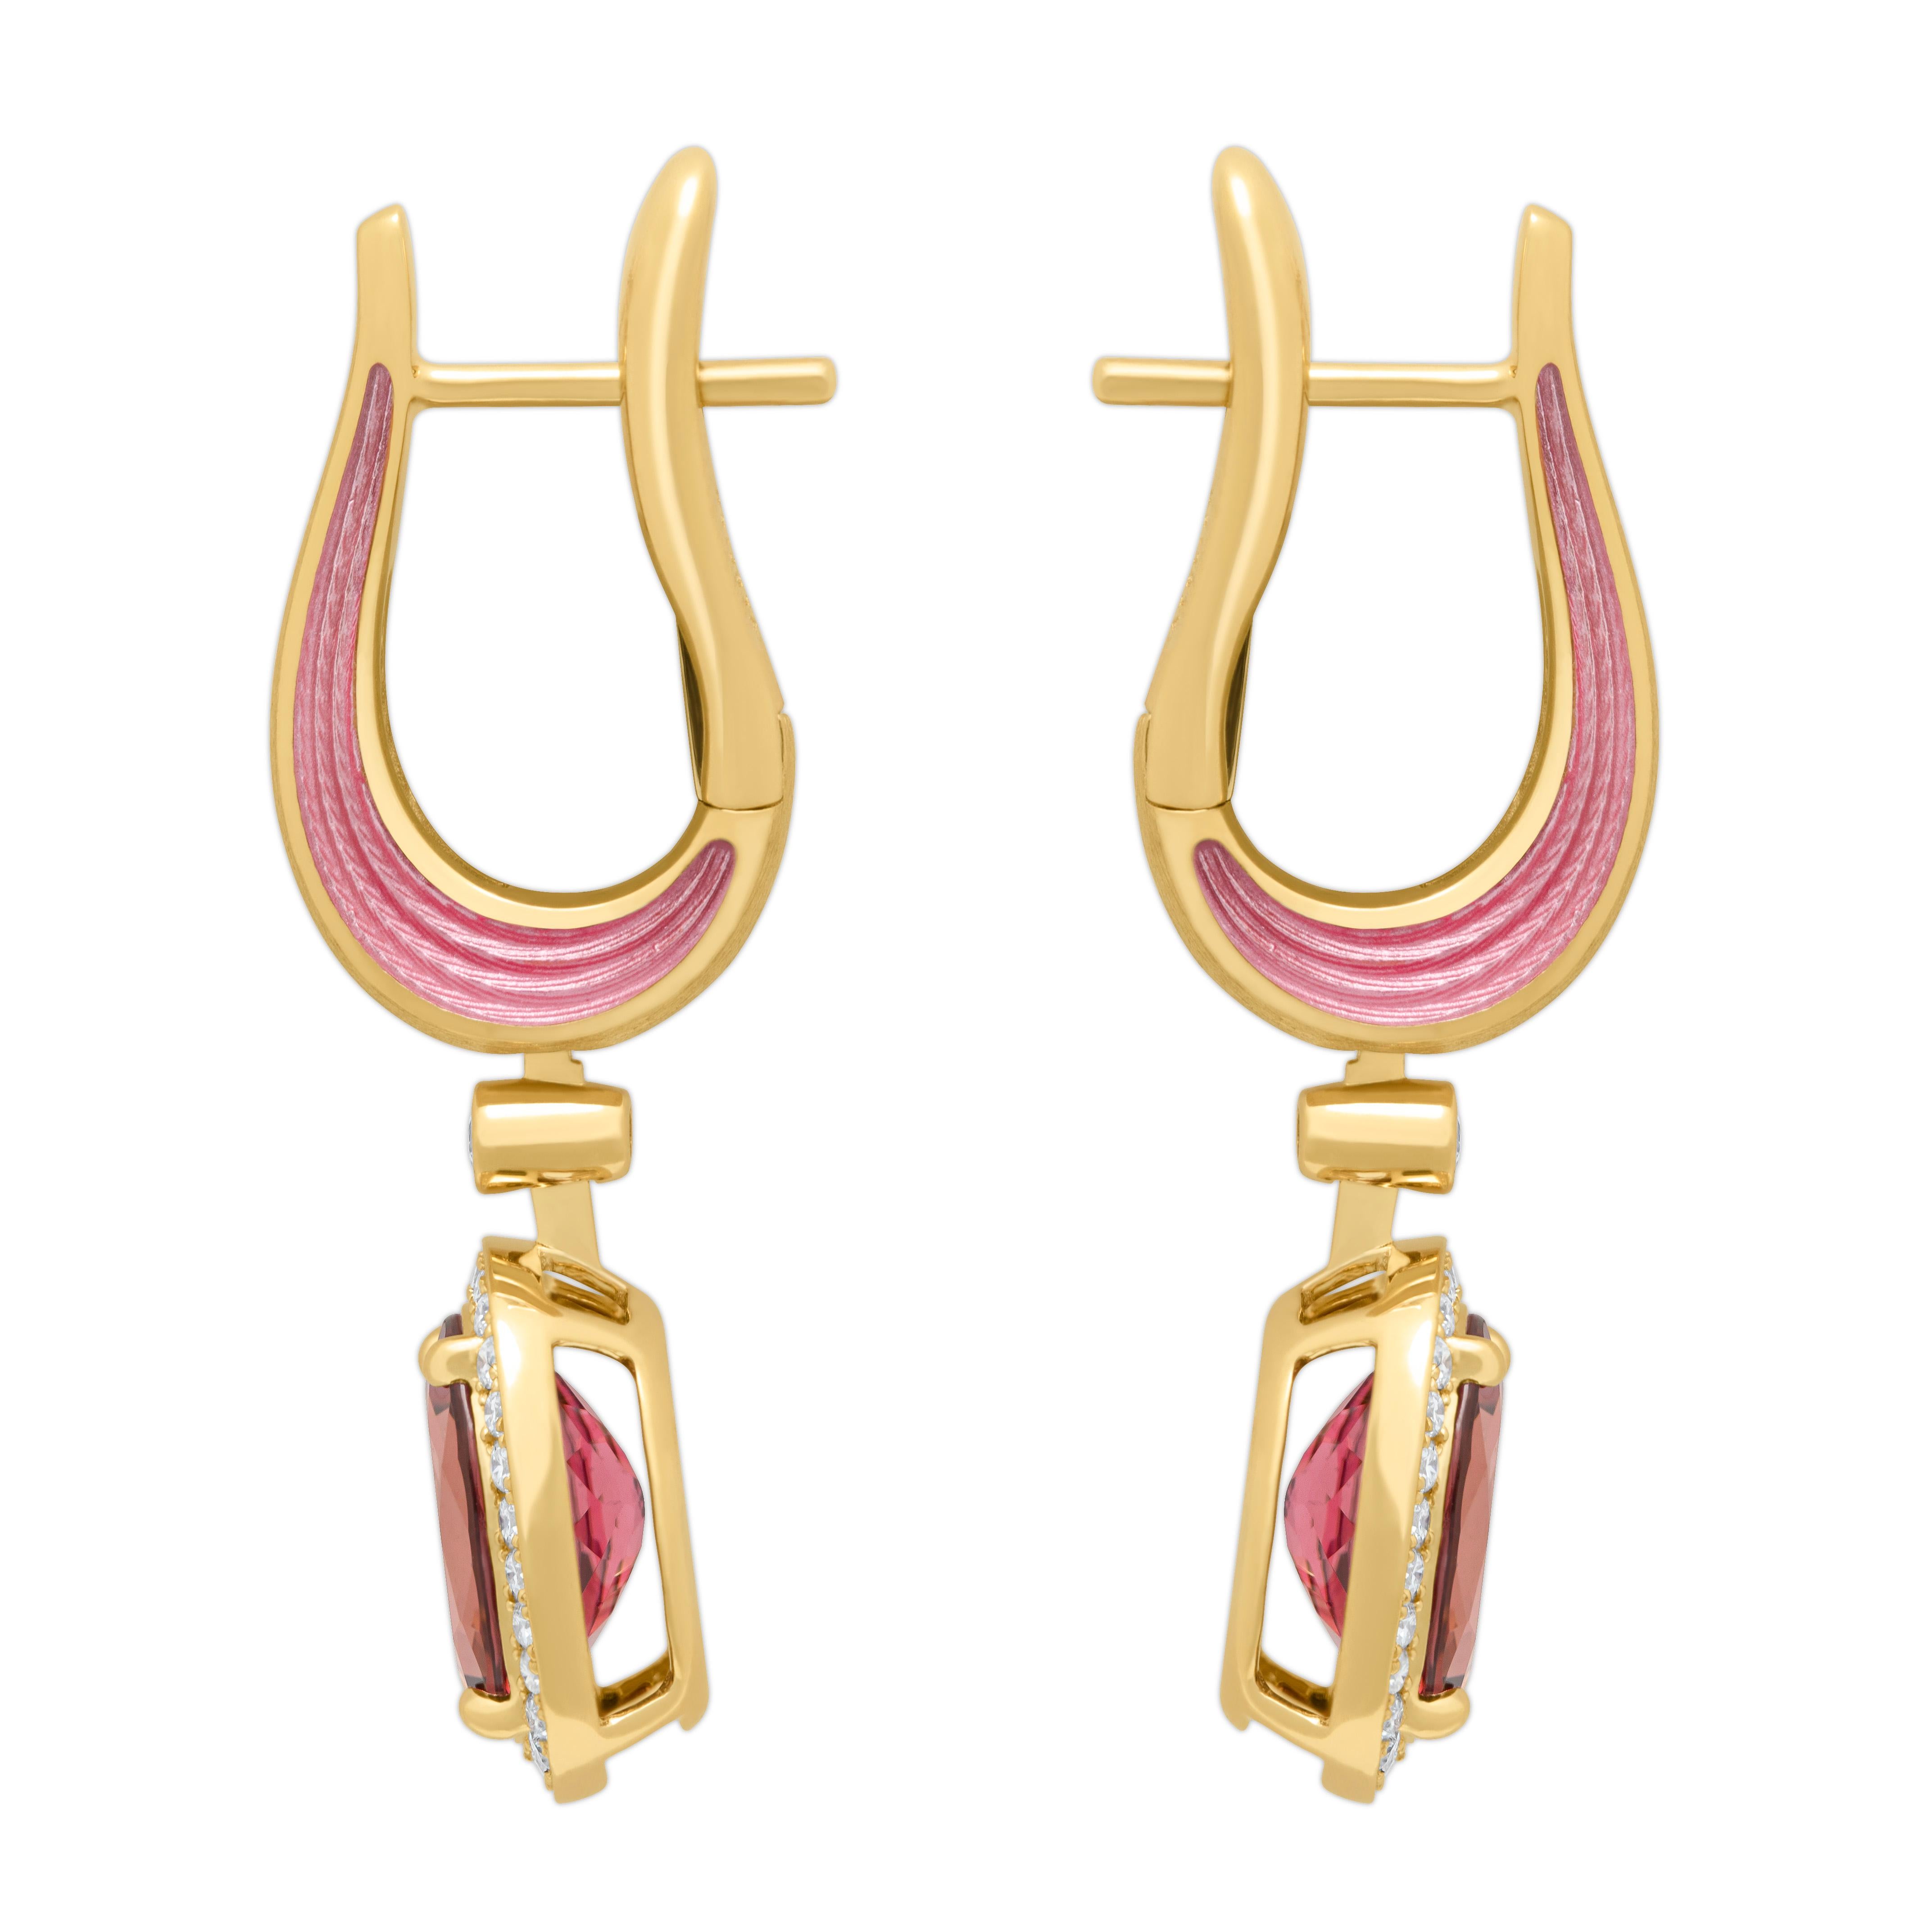 Pink Tourmaline 3.42 Carat Diamonds Enamel 18 Karat Yellow Gold New Classic Earrings
We have published a series of new Earrings with the same idea but with different details. Introducing Earrings crafted from 18 Karat Yellow Gold, which in company